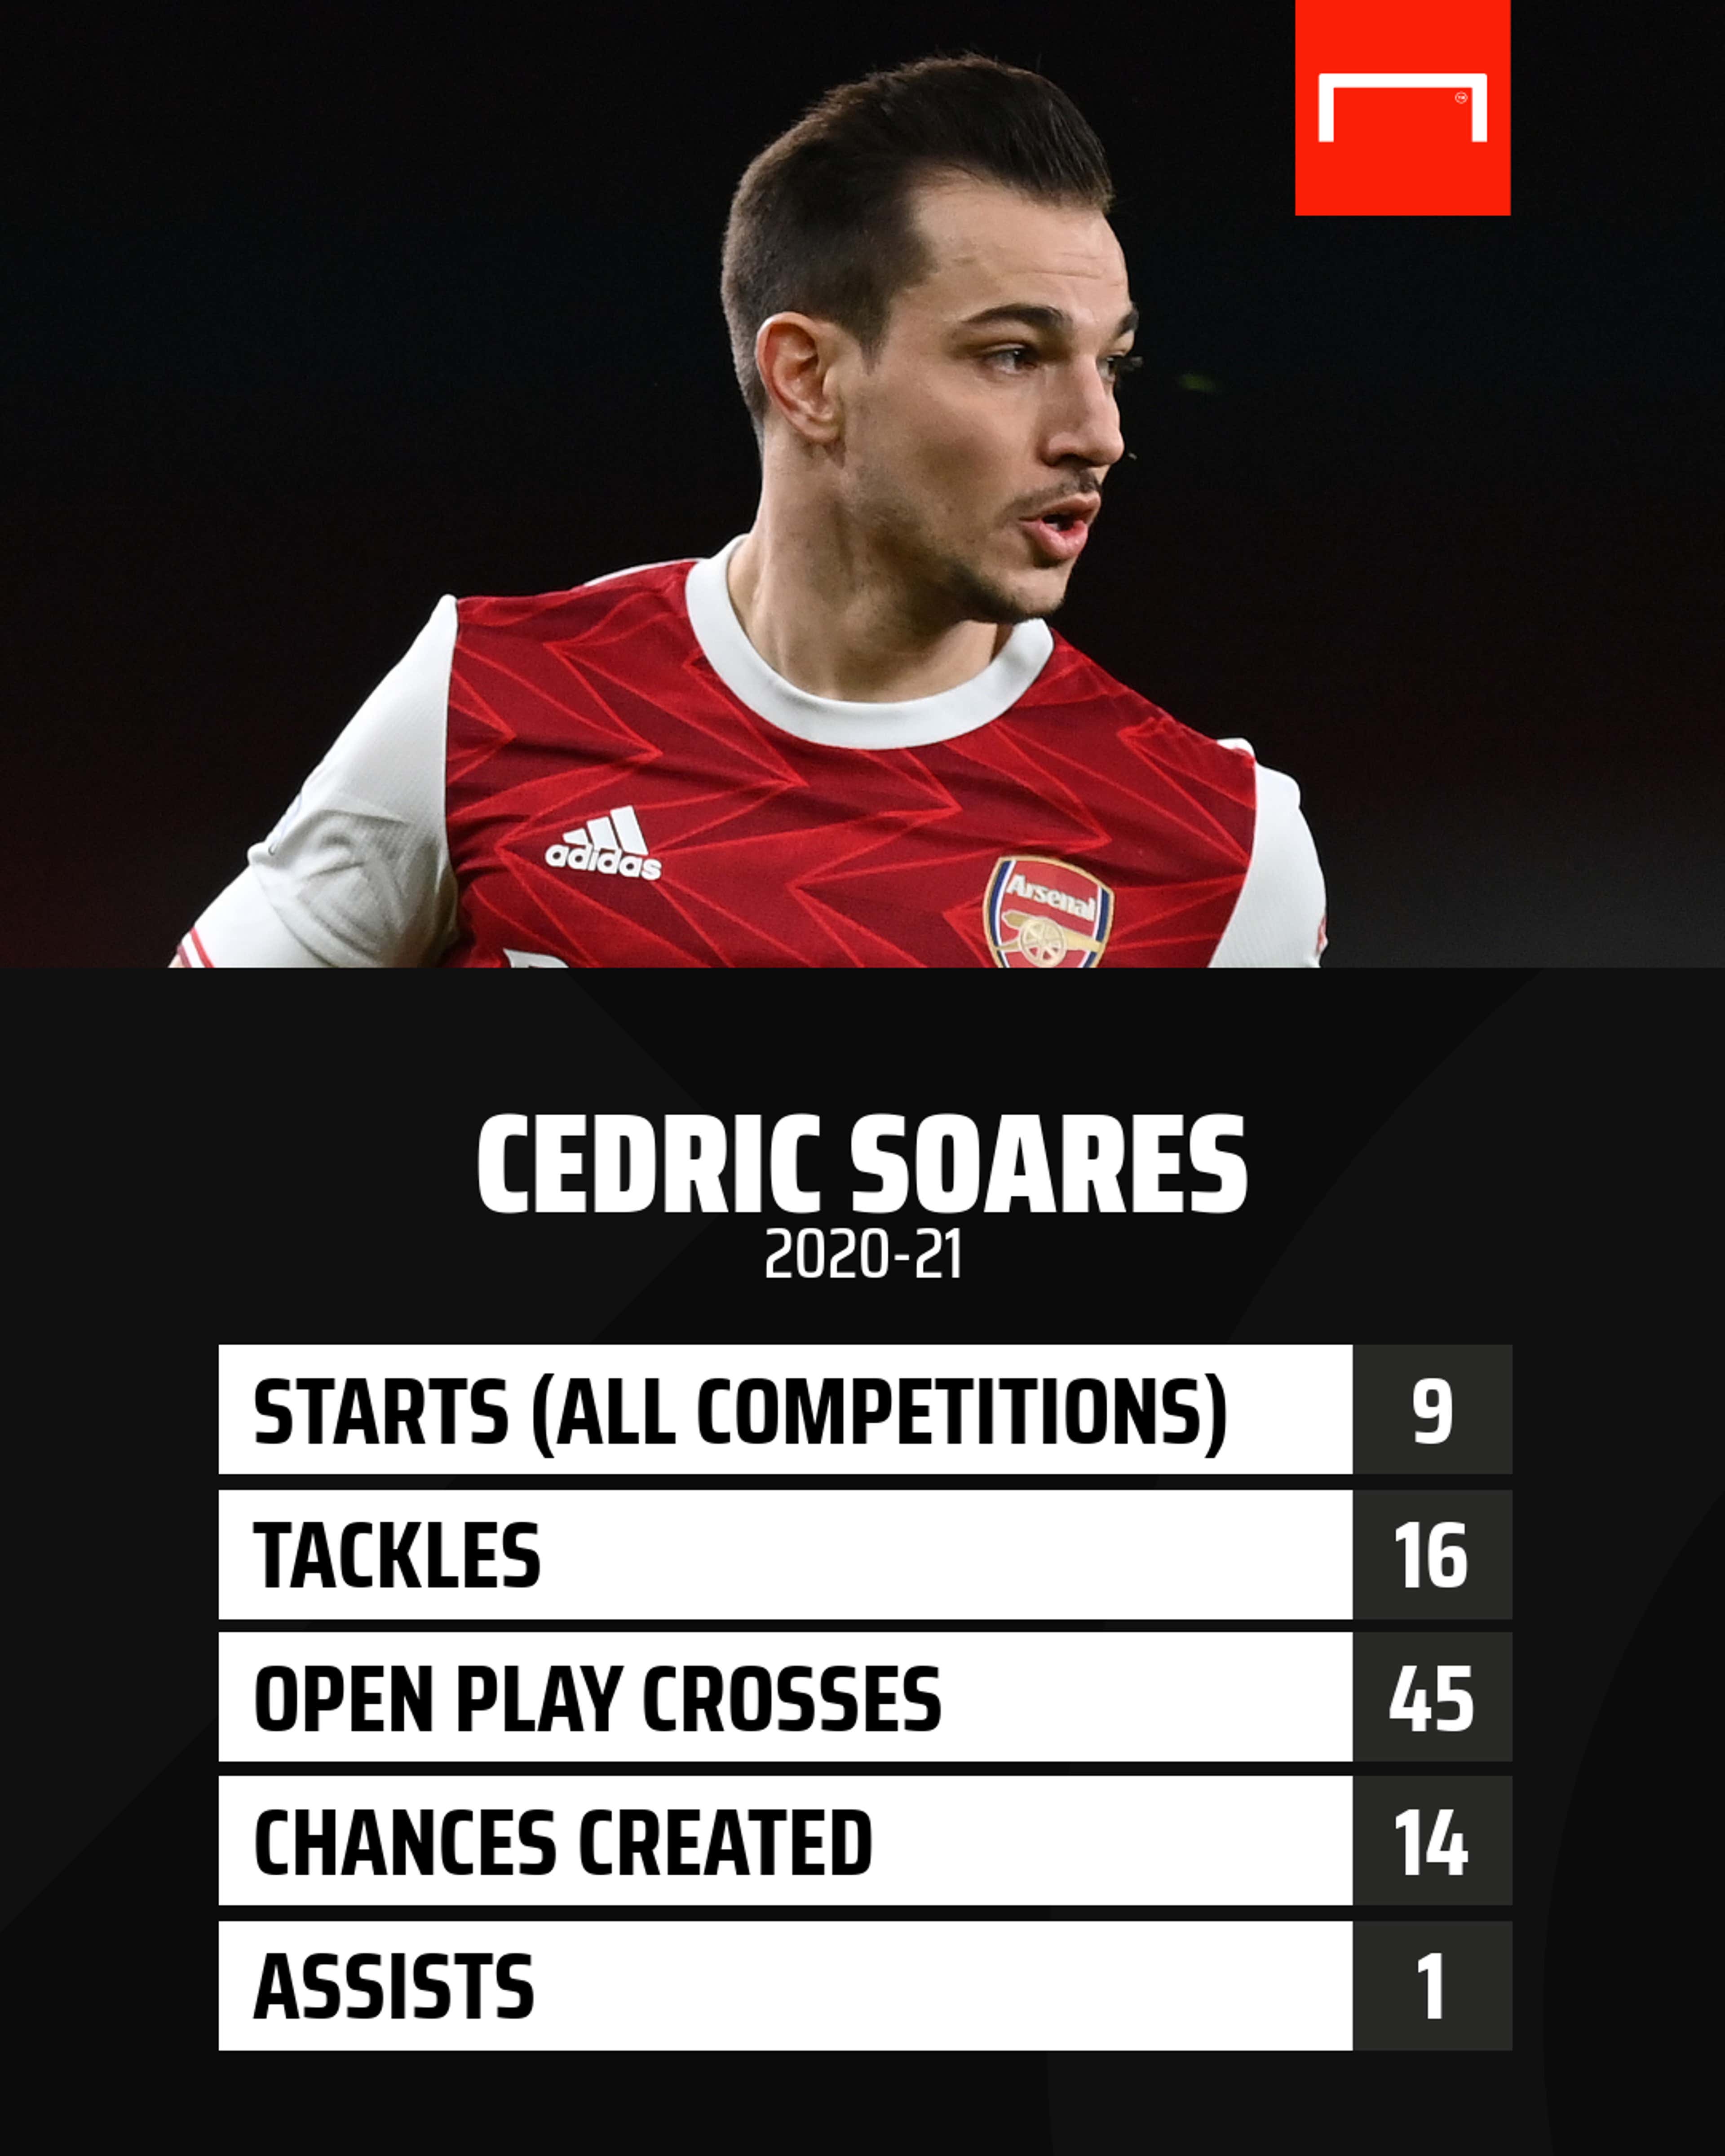 PES 2016 Arsenal FC (North London) Player Faces & Overall Rating 